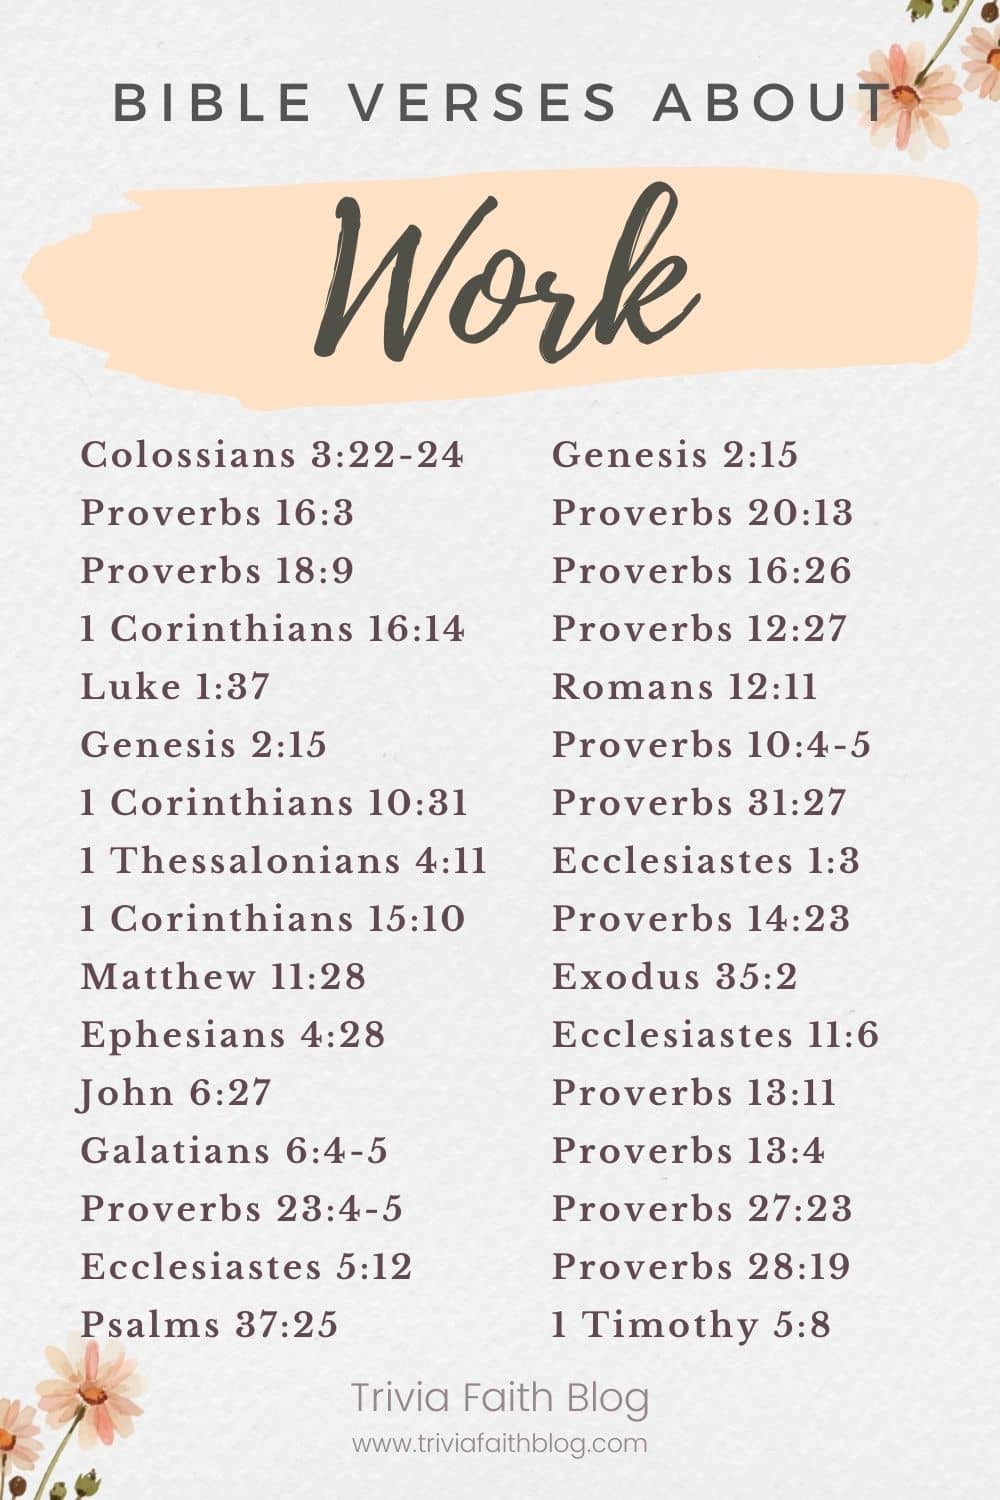 Bible verses about work